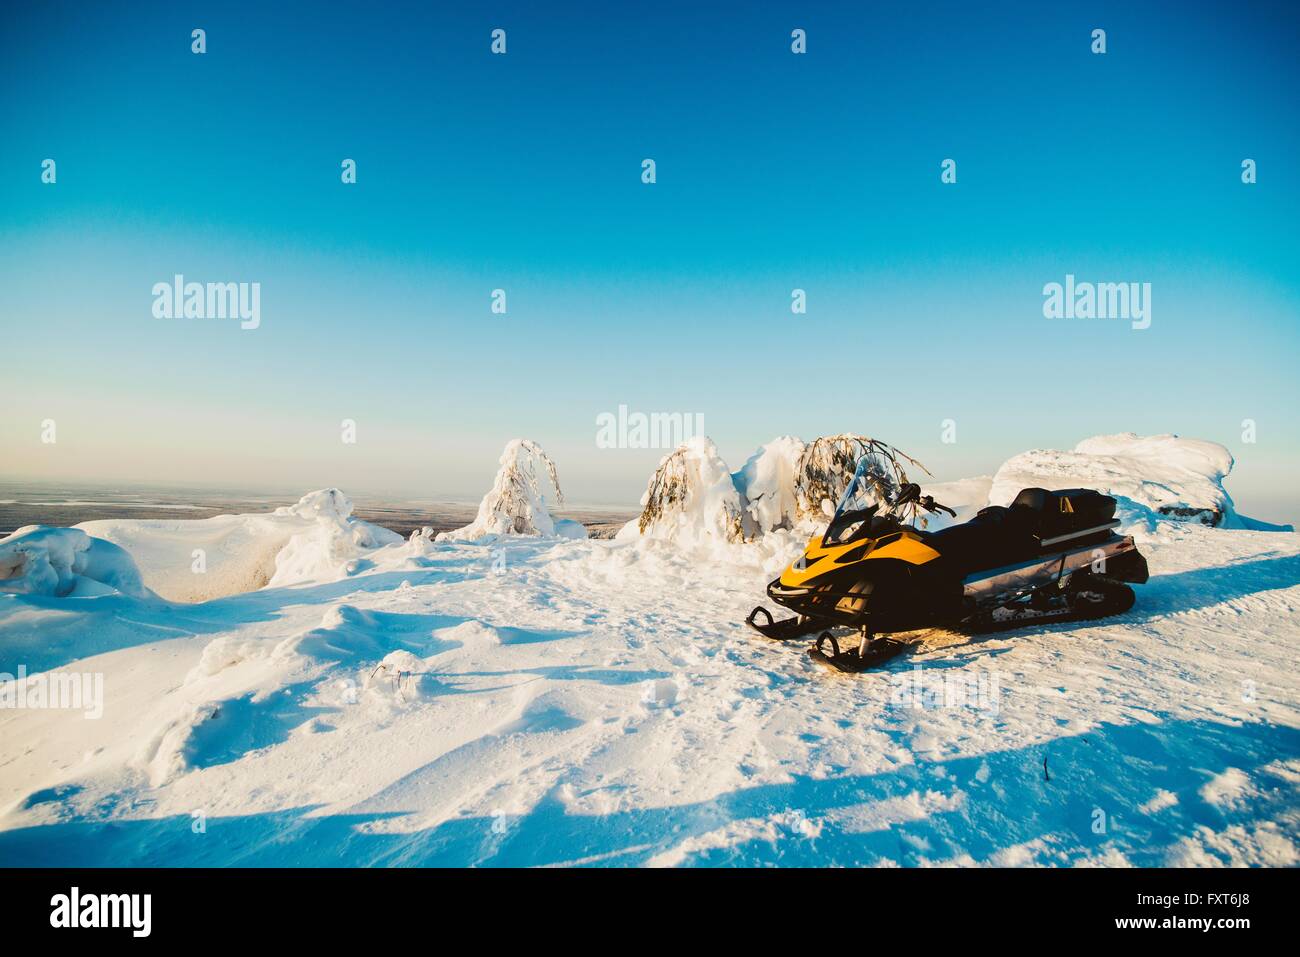 Snow vehicle parked on snowy landscape, Russia Stock Photo